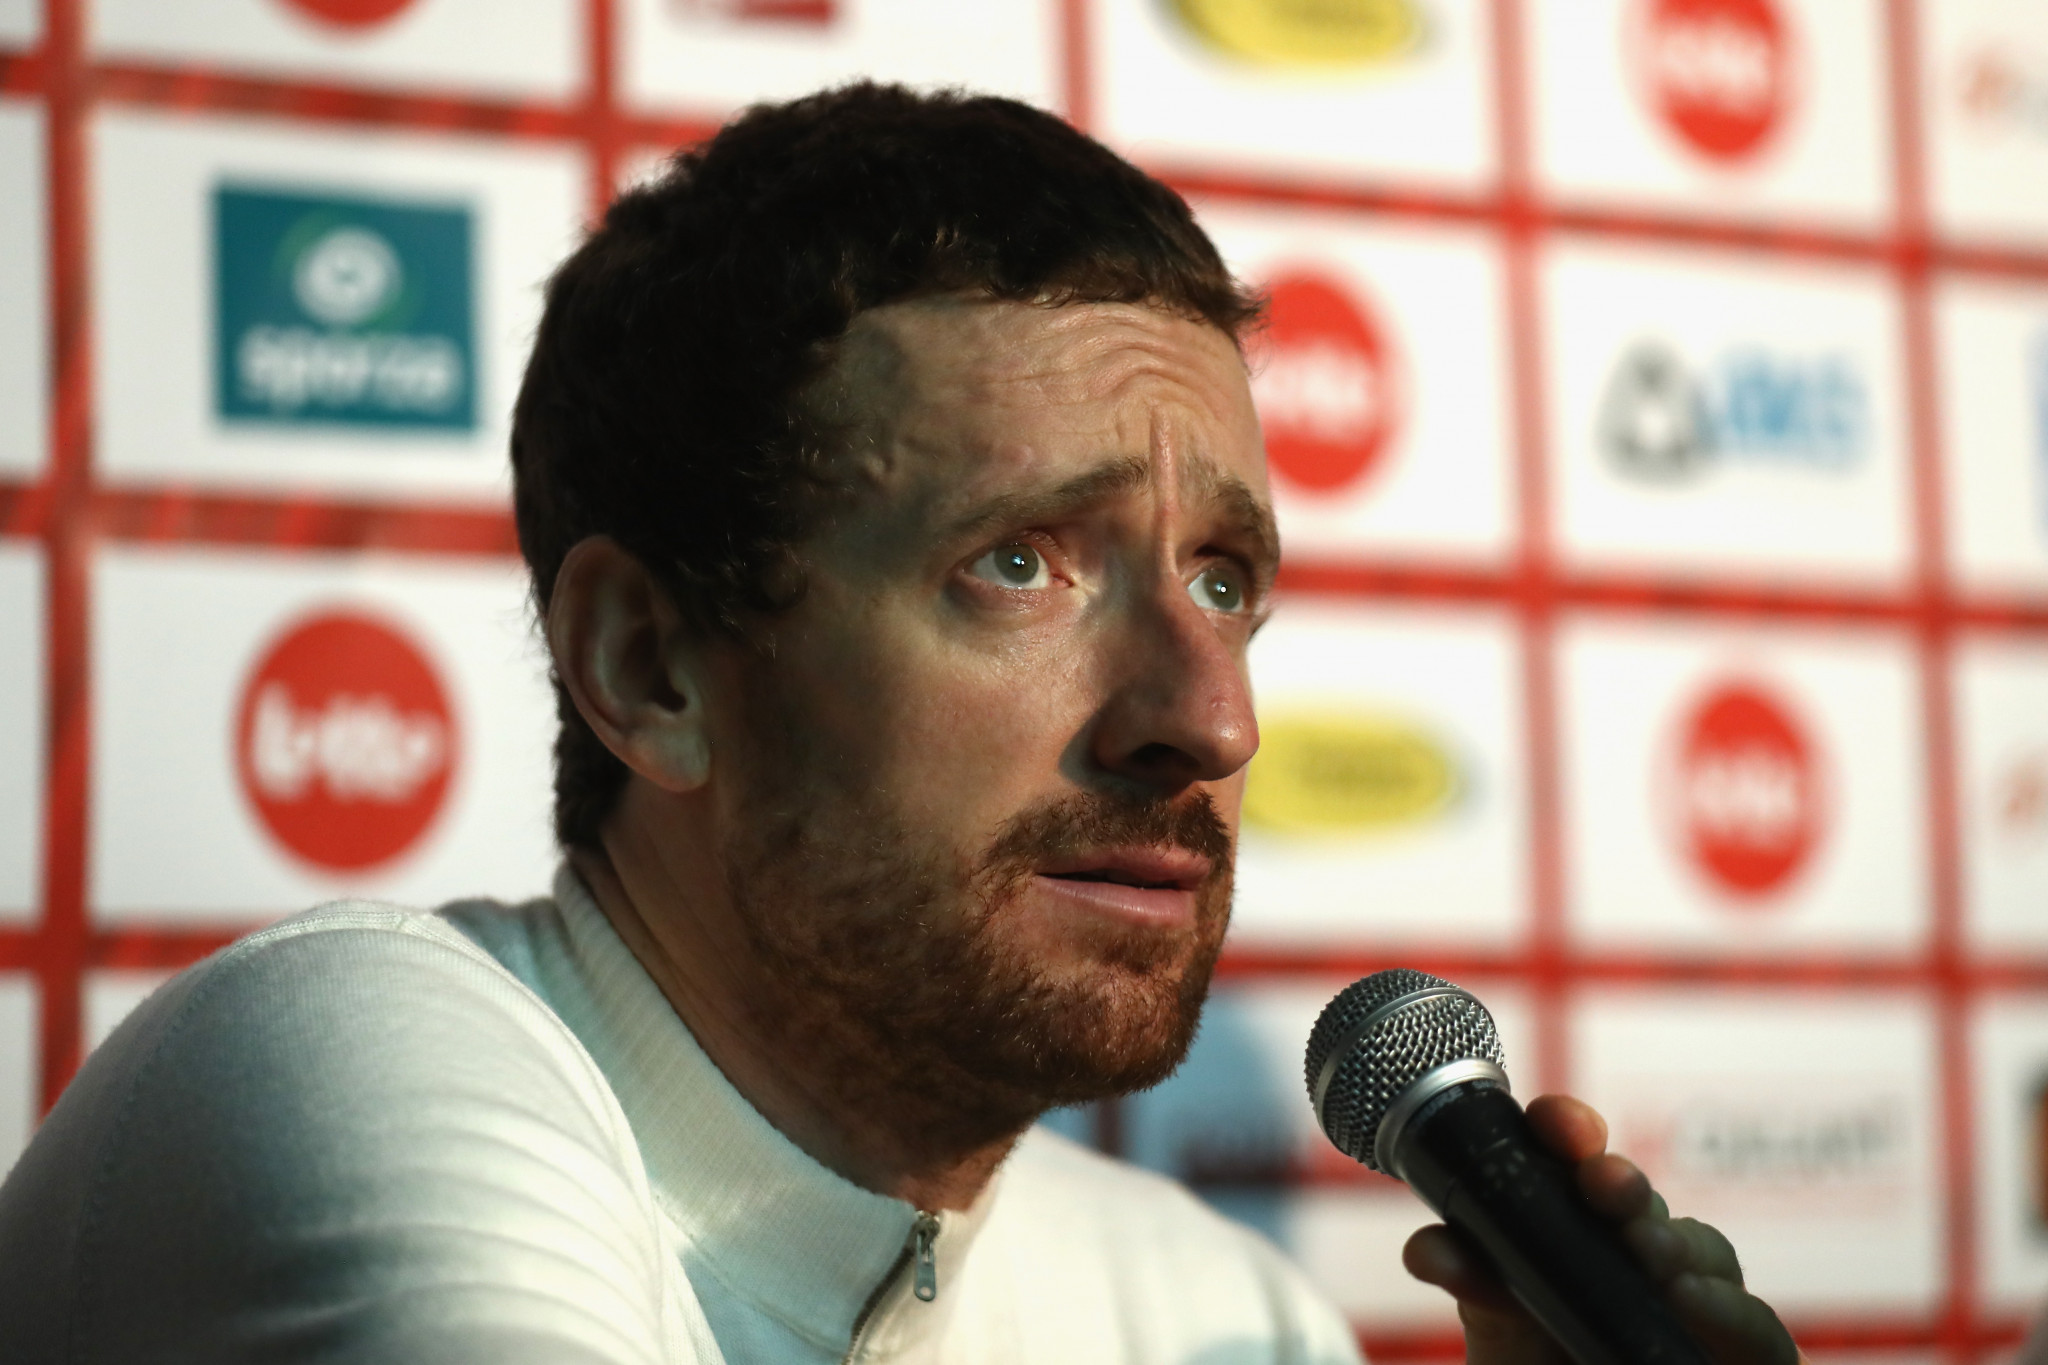 Richard Freeman has never been able to prove the contents of a mystery package sent to Sir Bradley Wiggins during a race in 2011 ©Getty Images